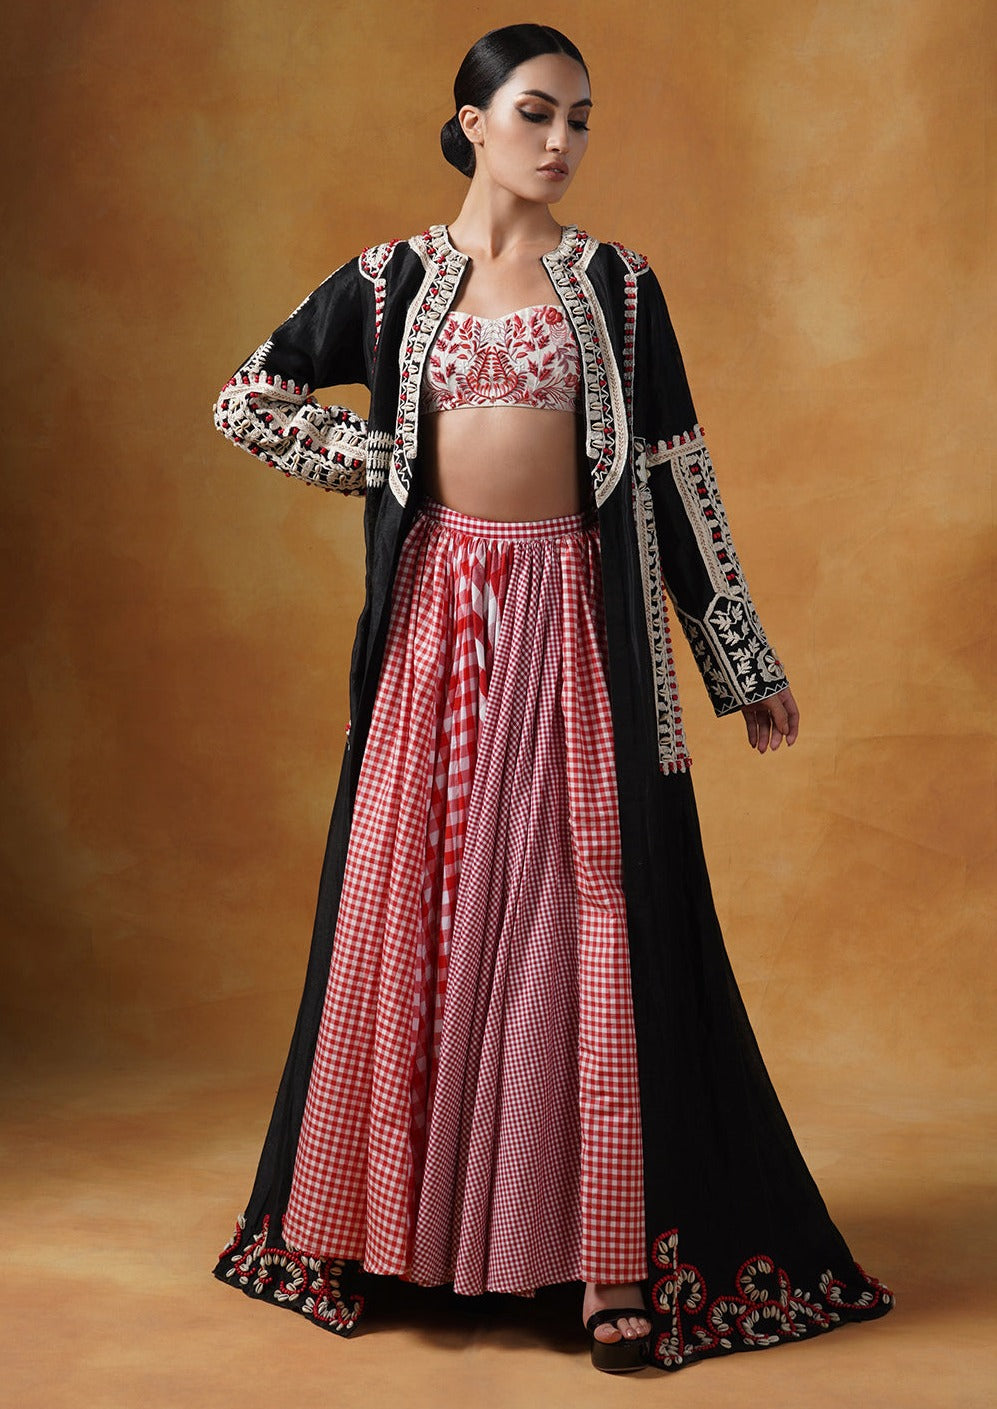 jacket is topped over a check skirt and embroidered blouse